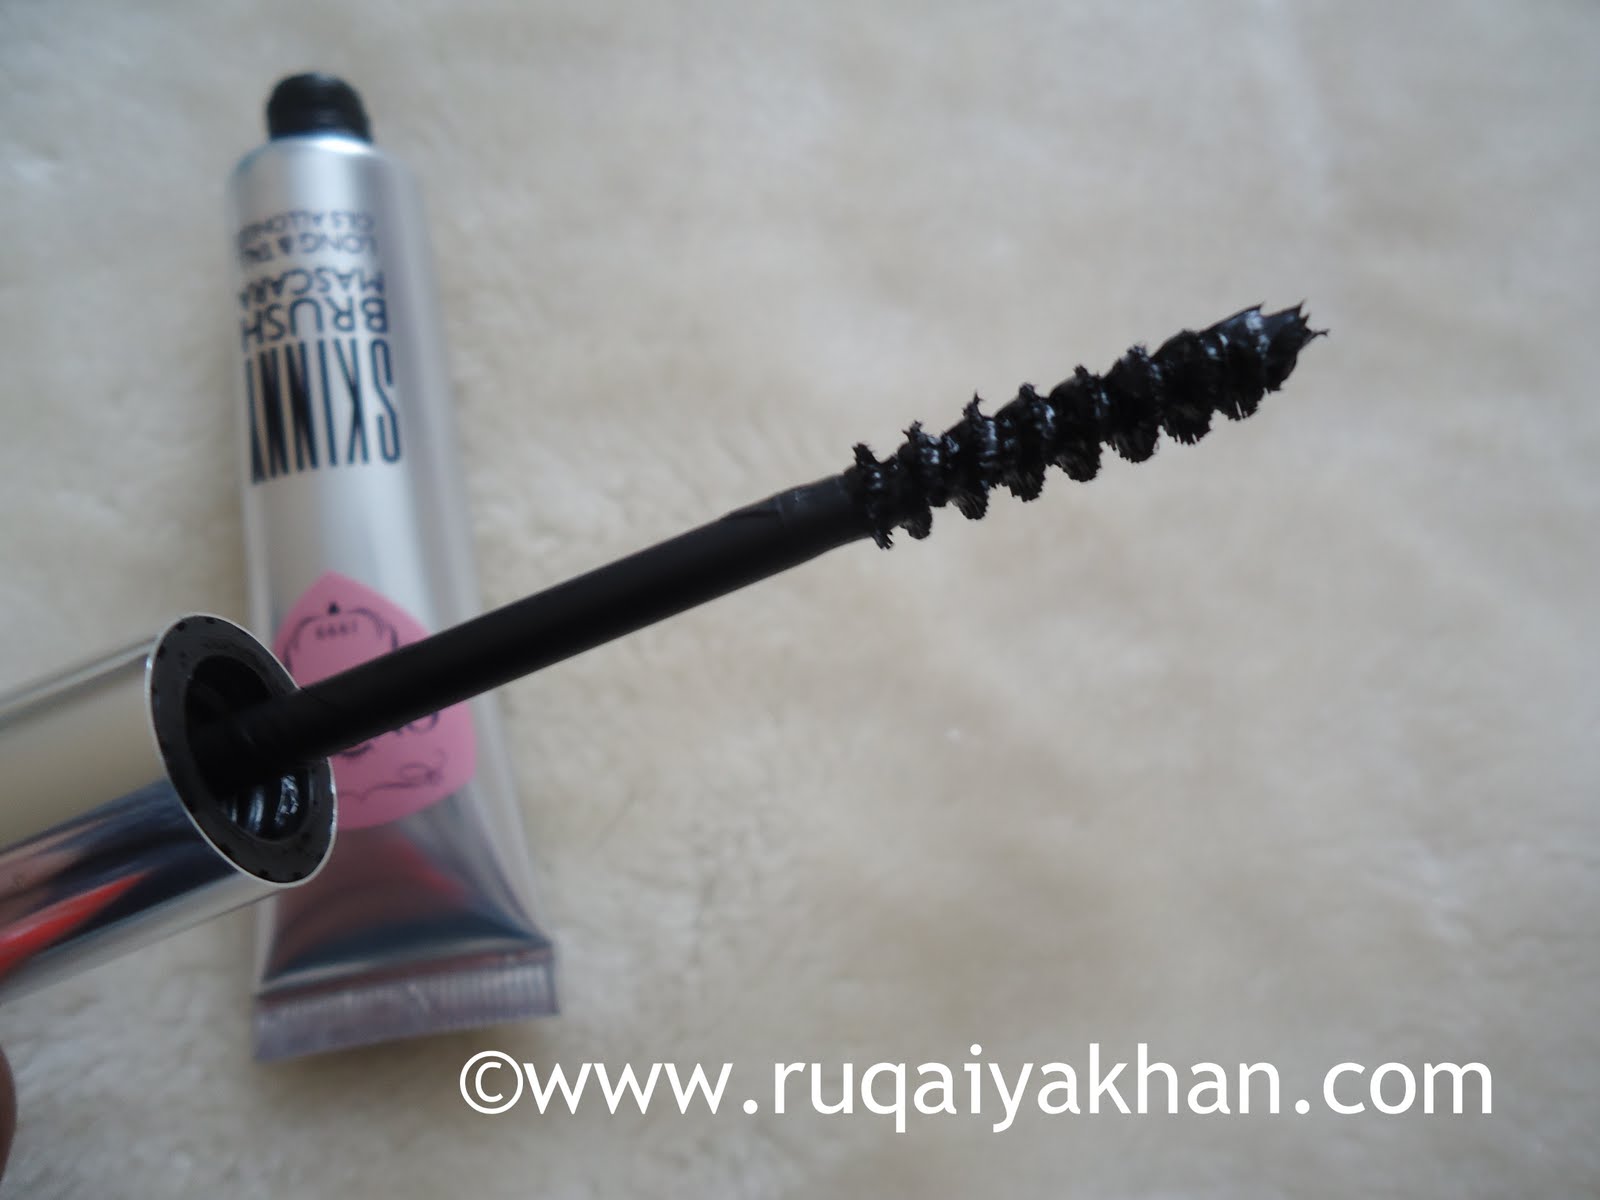 Scrangie: Eyeko Skinny Brush Long and Tall Mascara Pictures and Review